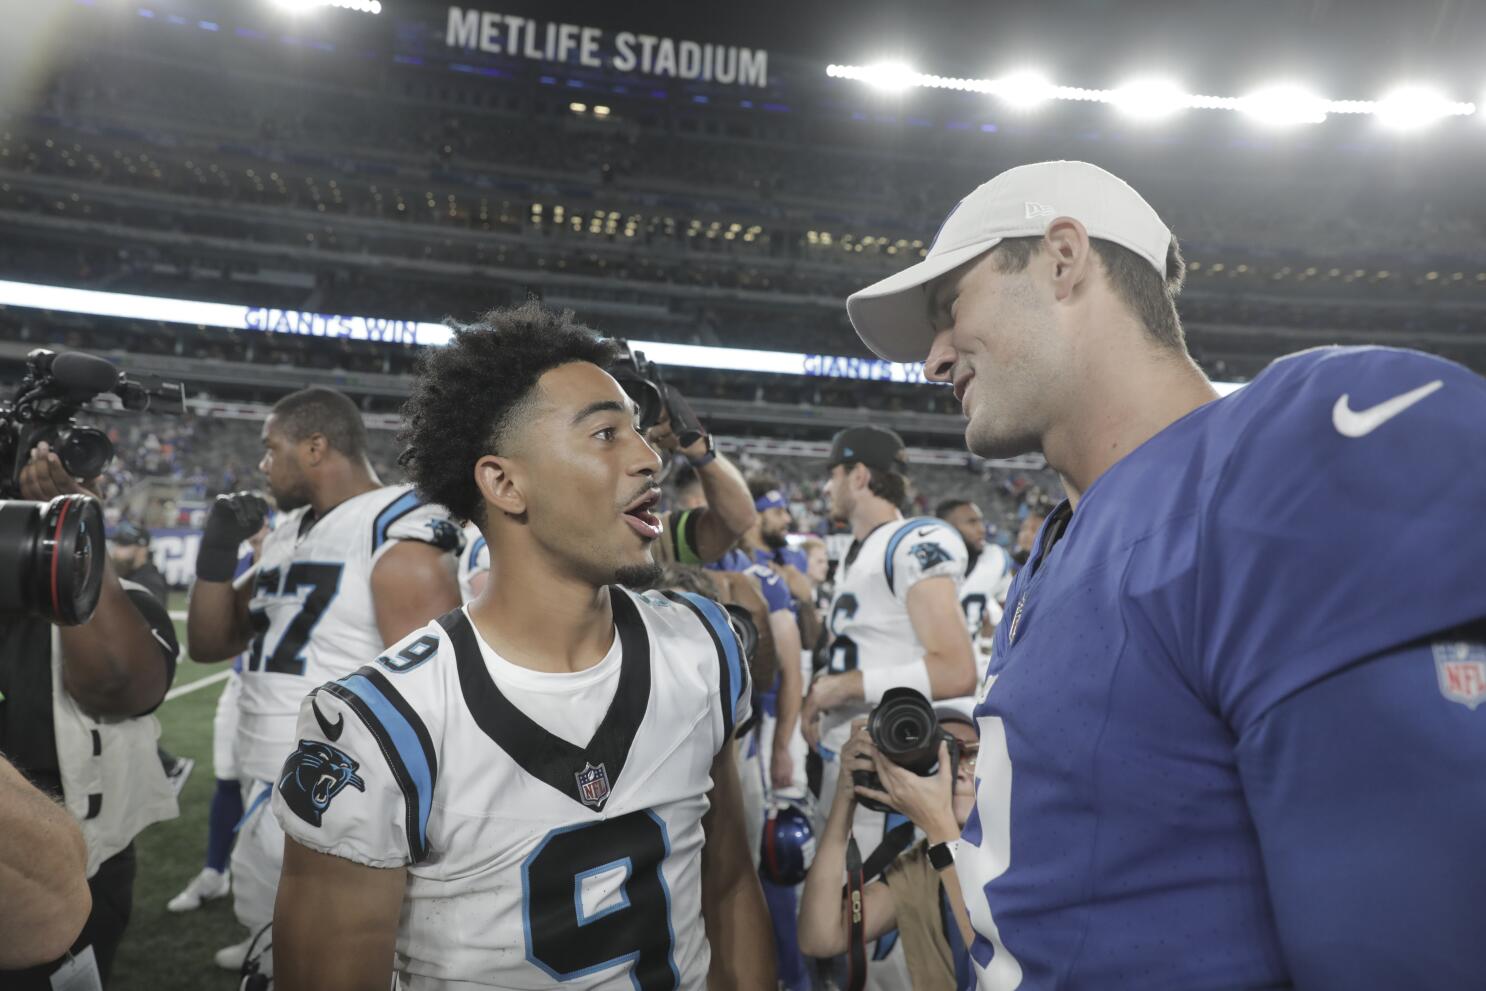 Jones plays like $40 million man for Giants, No. 1 overall Young shows  flashes for Panthers - The San Diego Union-Tribune